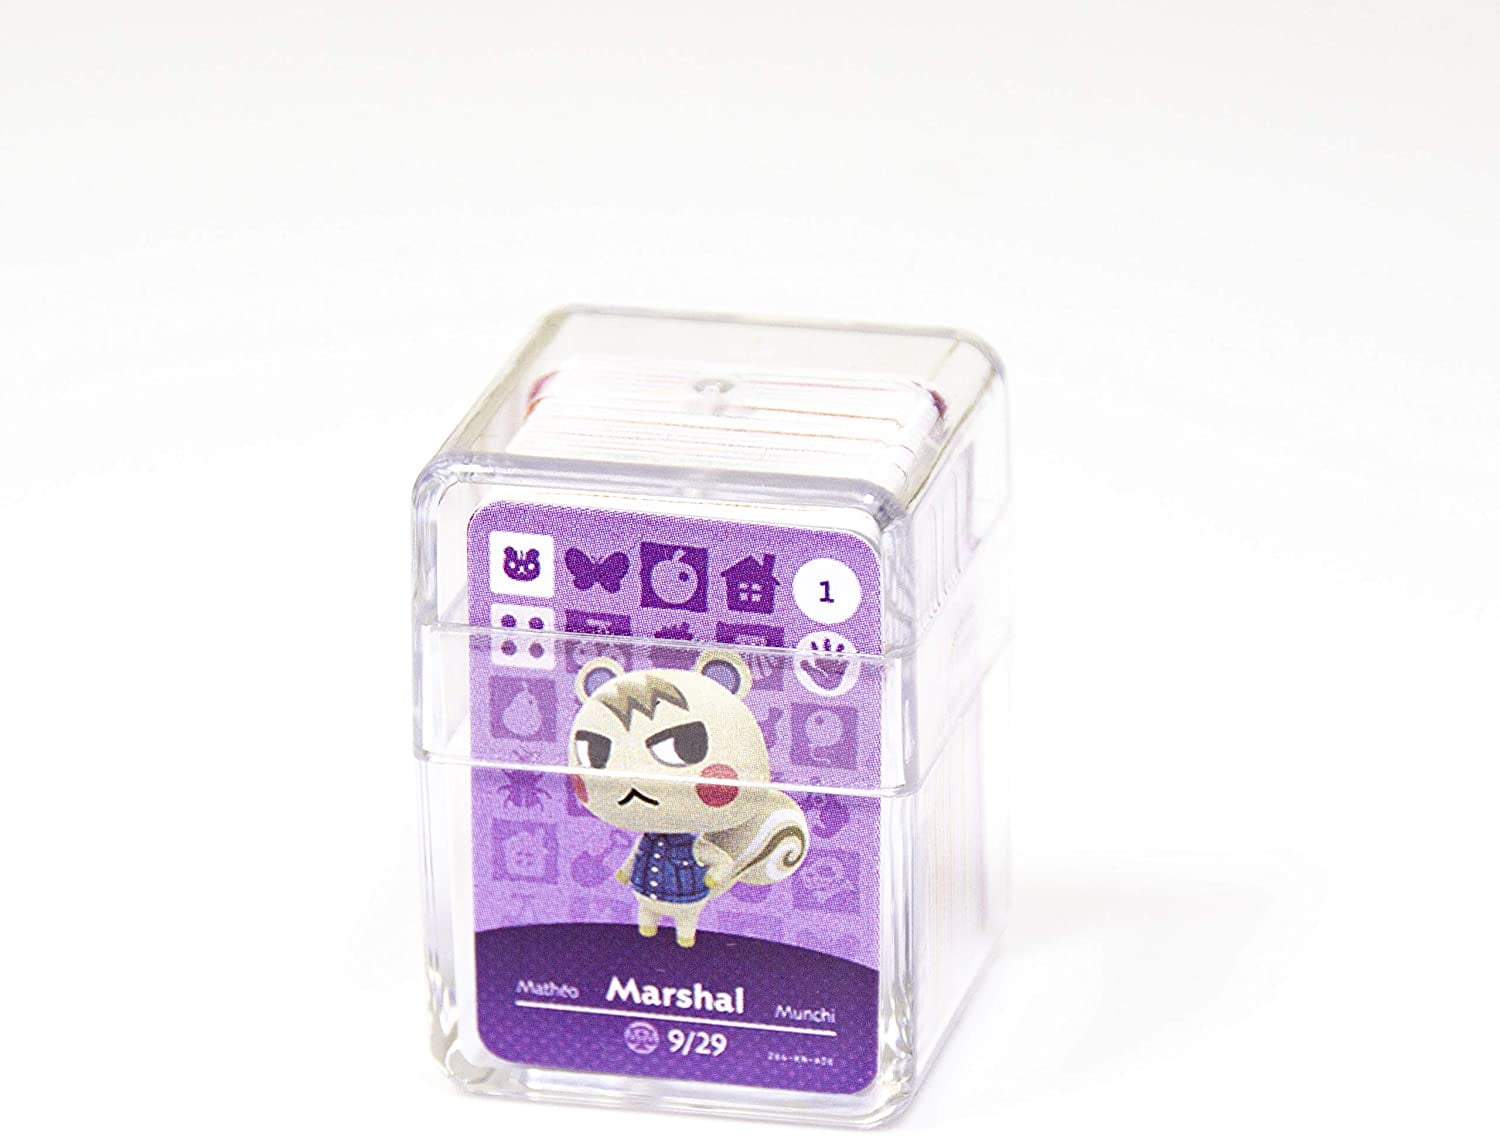 lite 24 Pcs ACNH NFC Tag Game Cards for Animal Crossing New Horizons with Crystal Case Switch 